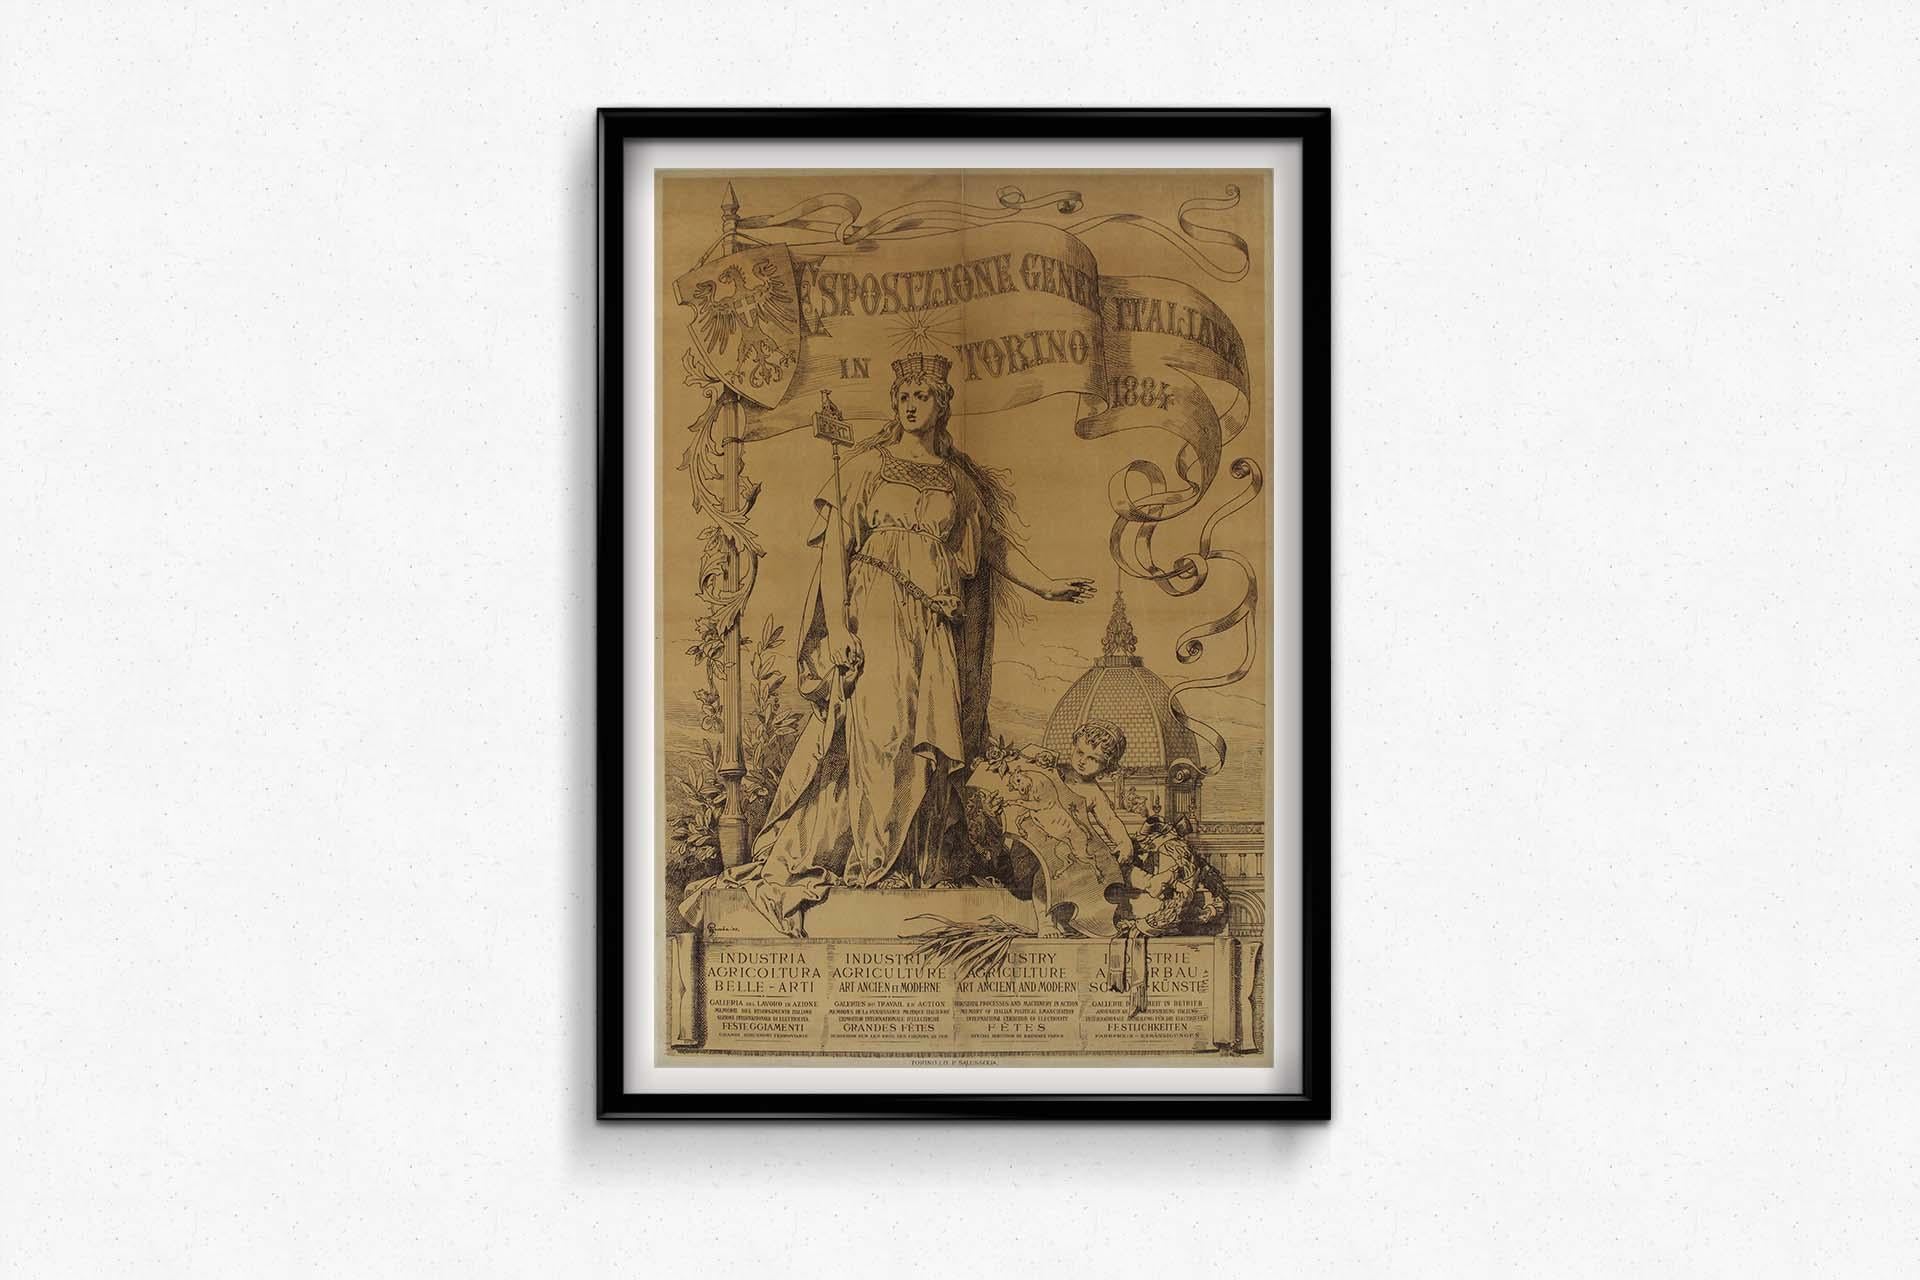 Crafted in 1884 by the skilled artist Francesco Gamba, the original poster for the Esposizione Generale Italiana (General Italian Exhibition) in Turin is a remarkable piece of art that celebrates Italy's cultural and industrial achievements. As one